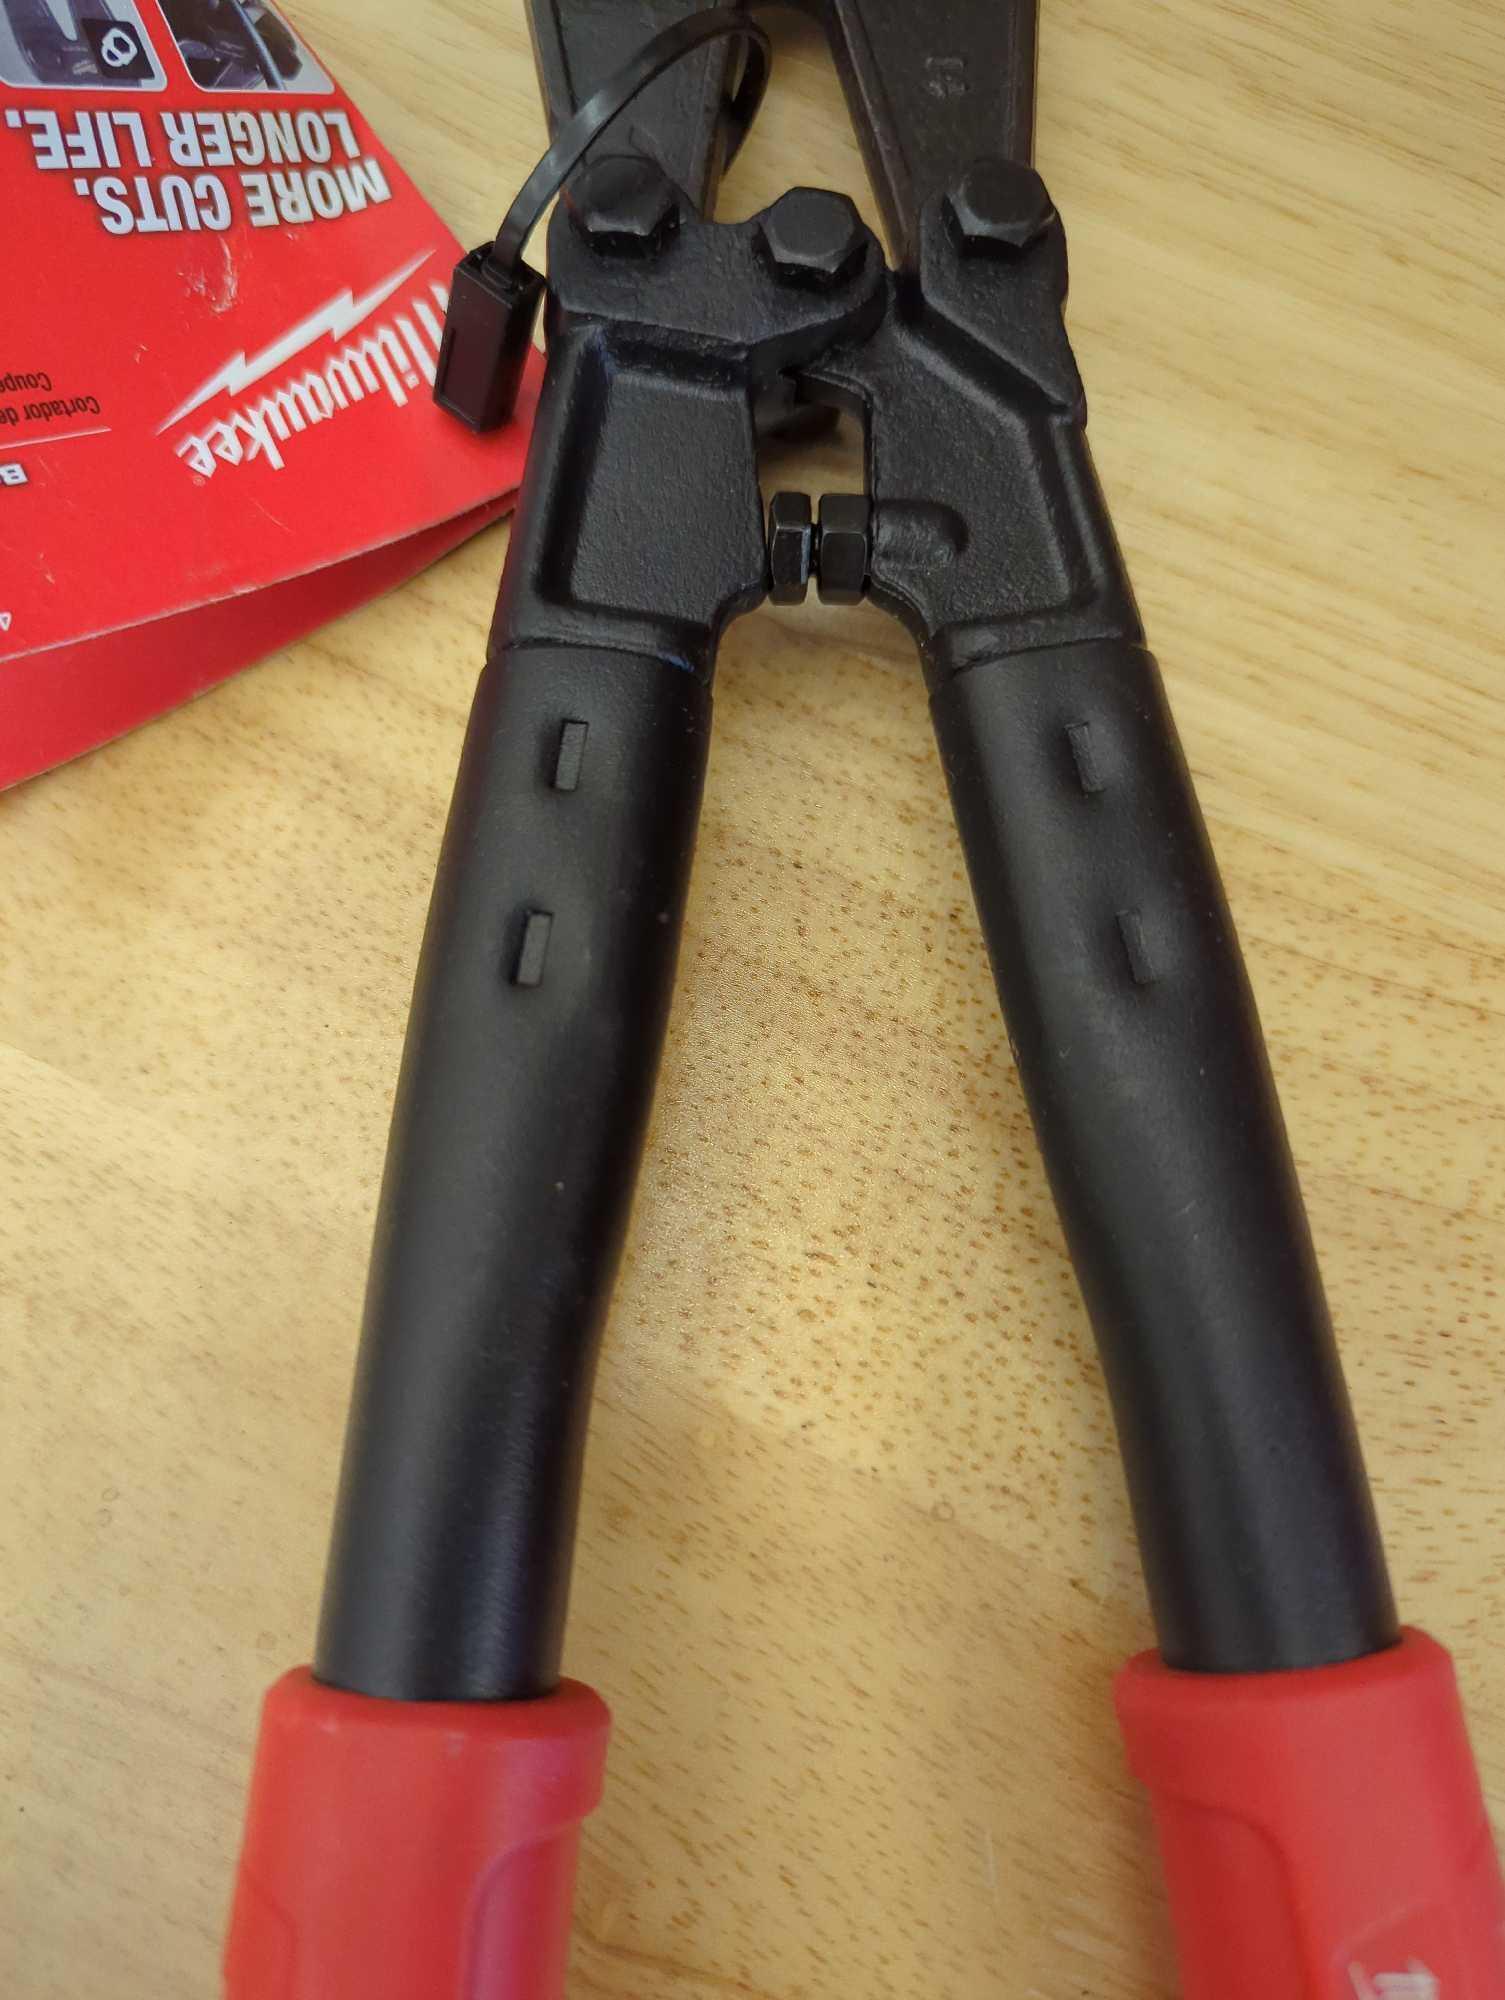 Milwaukee 14 in. Bolt Cutter With 5/16 in. Max Cut Capacity, Appears to be New Retail Price Value